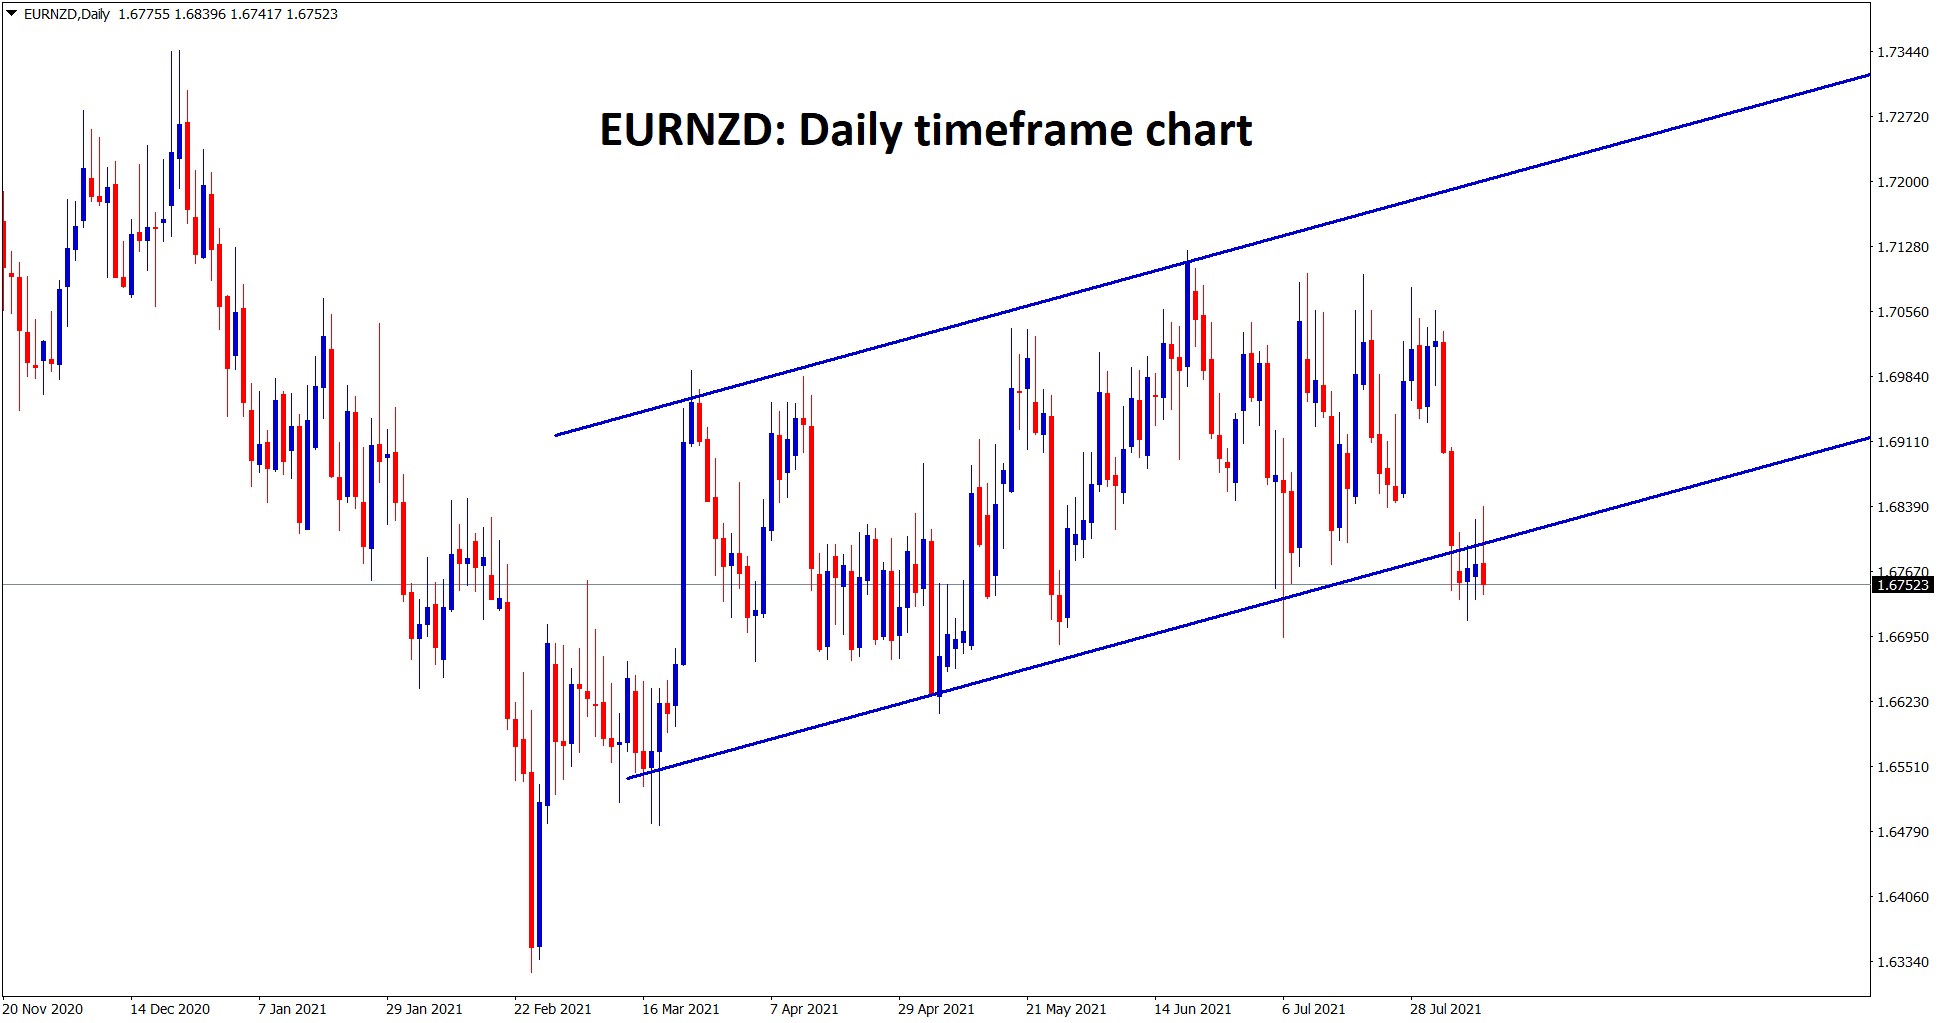 EURNZD struggles to move up however EURNZD is trying to range before falling down. wait for the confirmation of sellers.